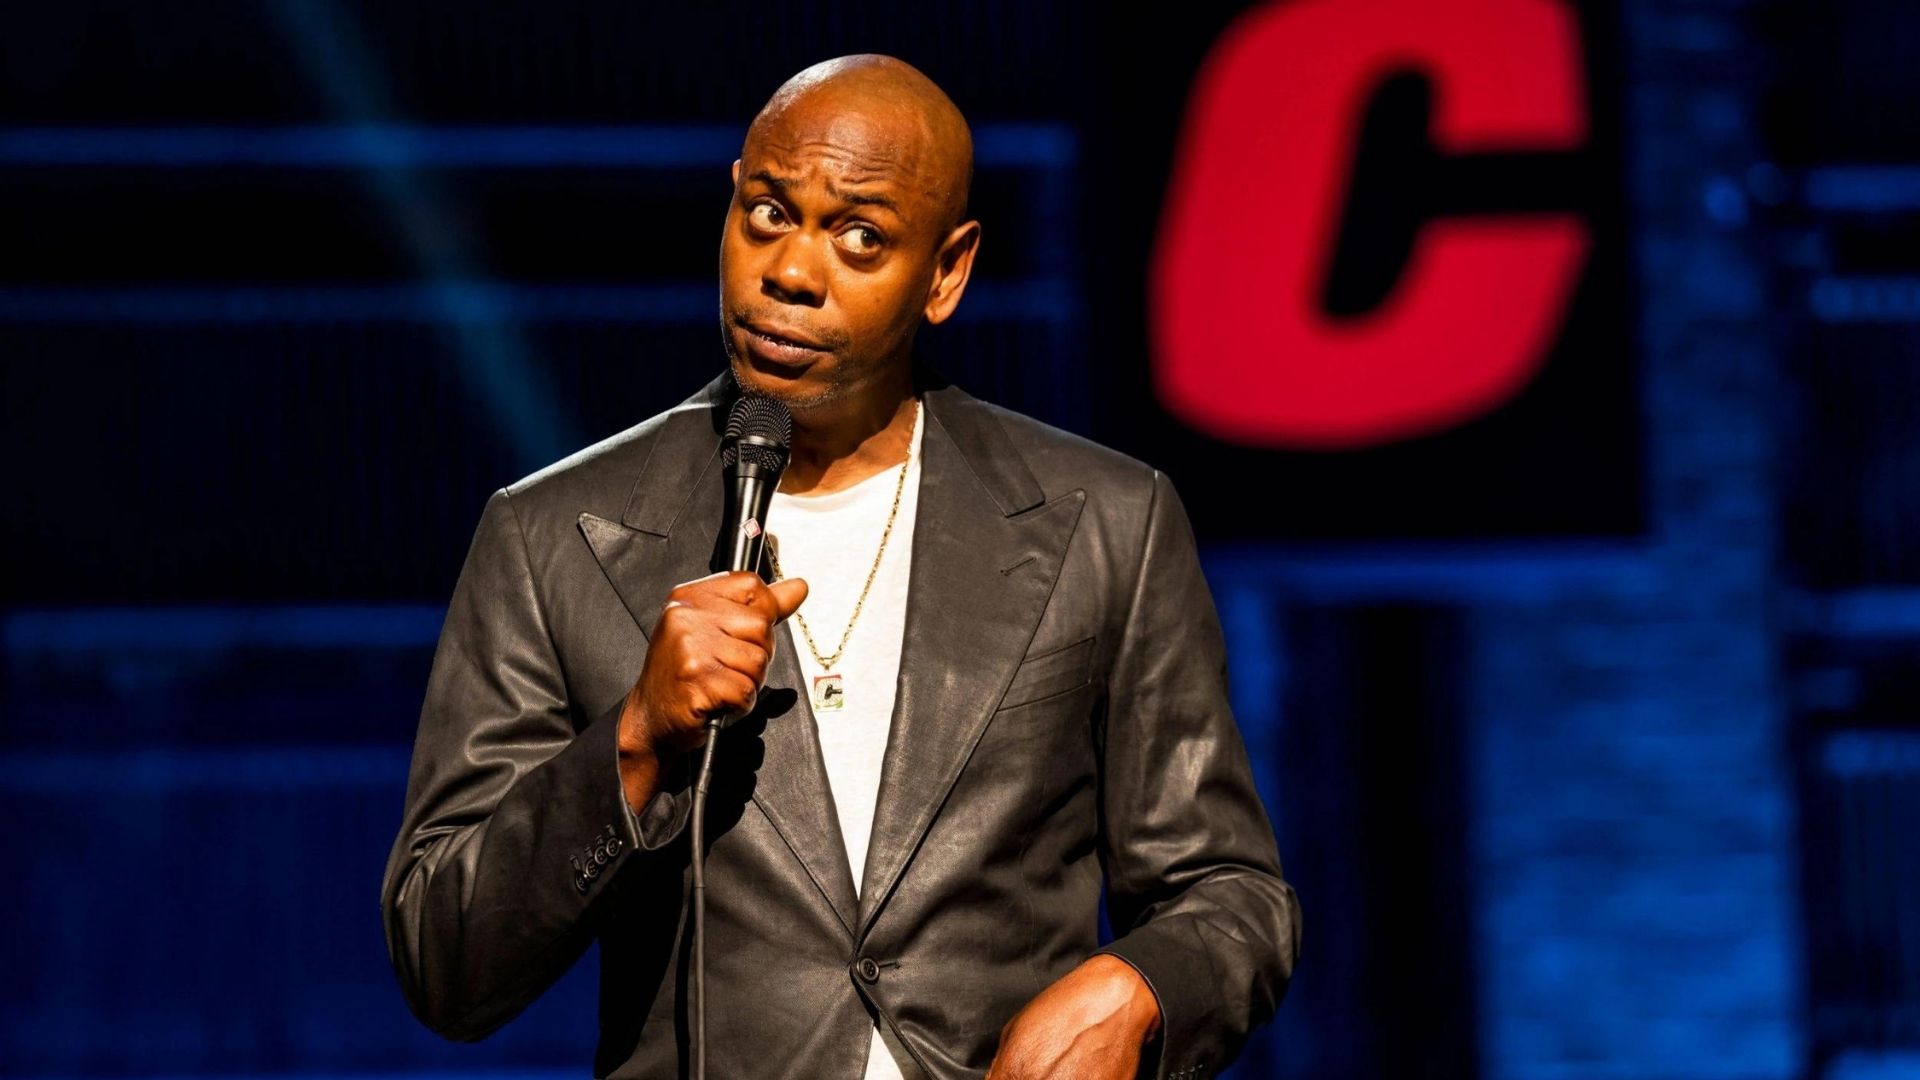 Dave Chappelle went after in front of an audience during a Netflix show